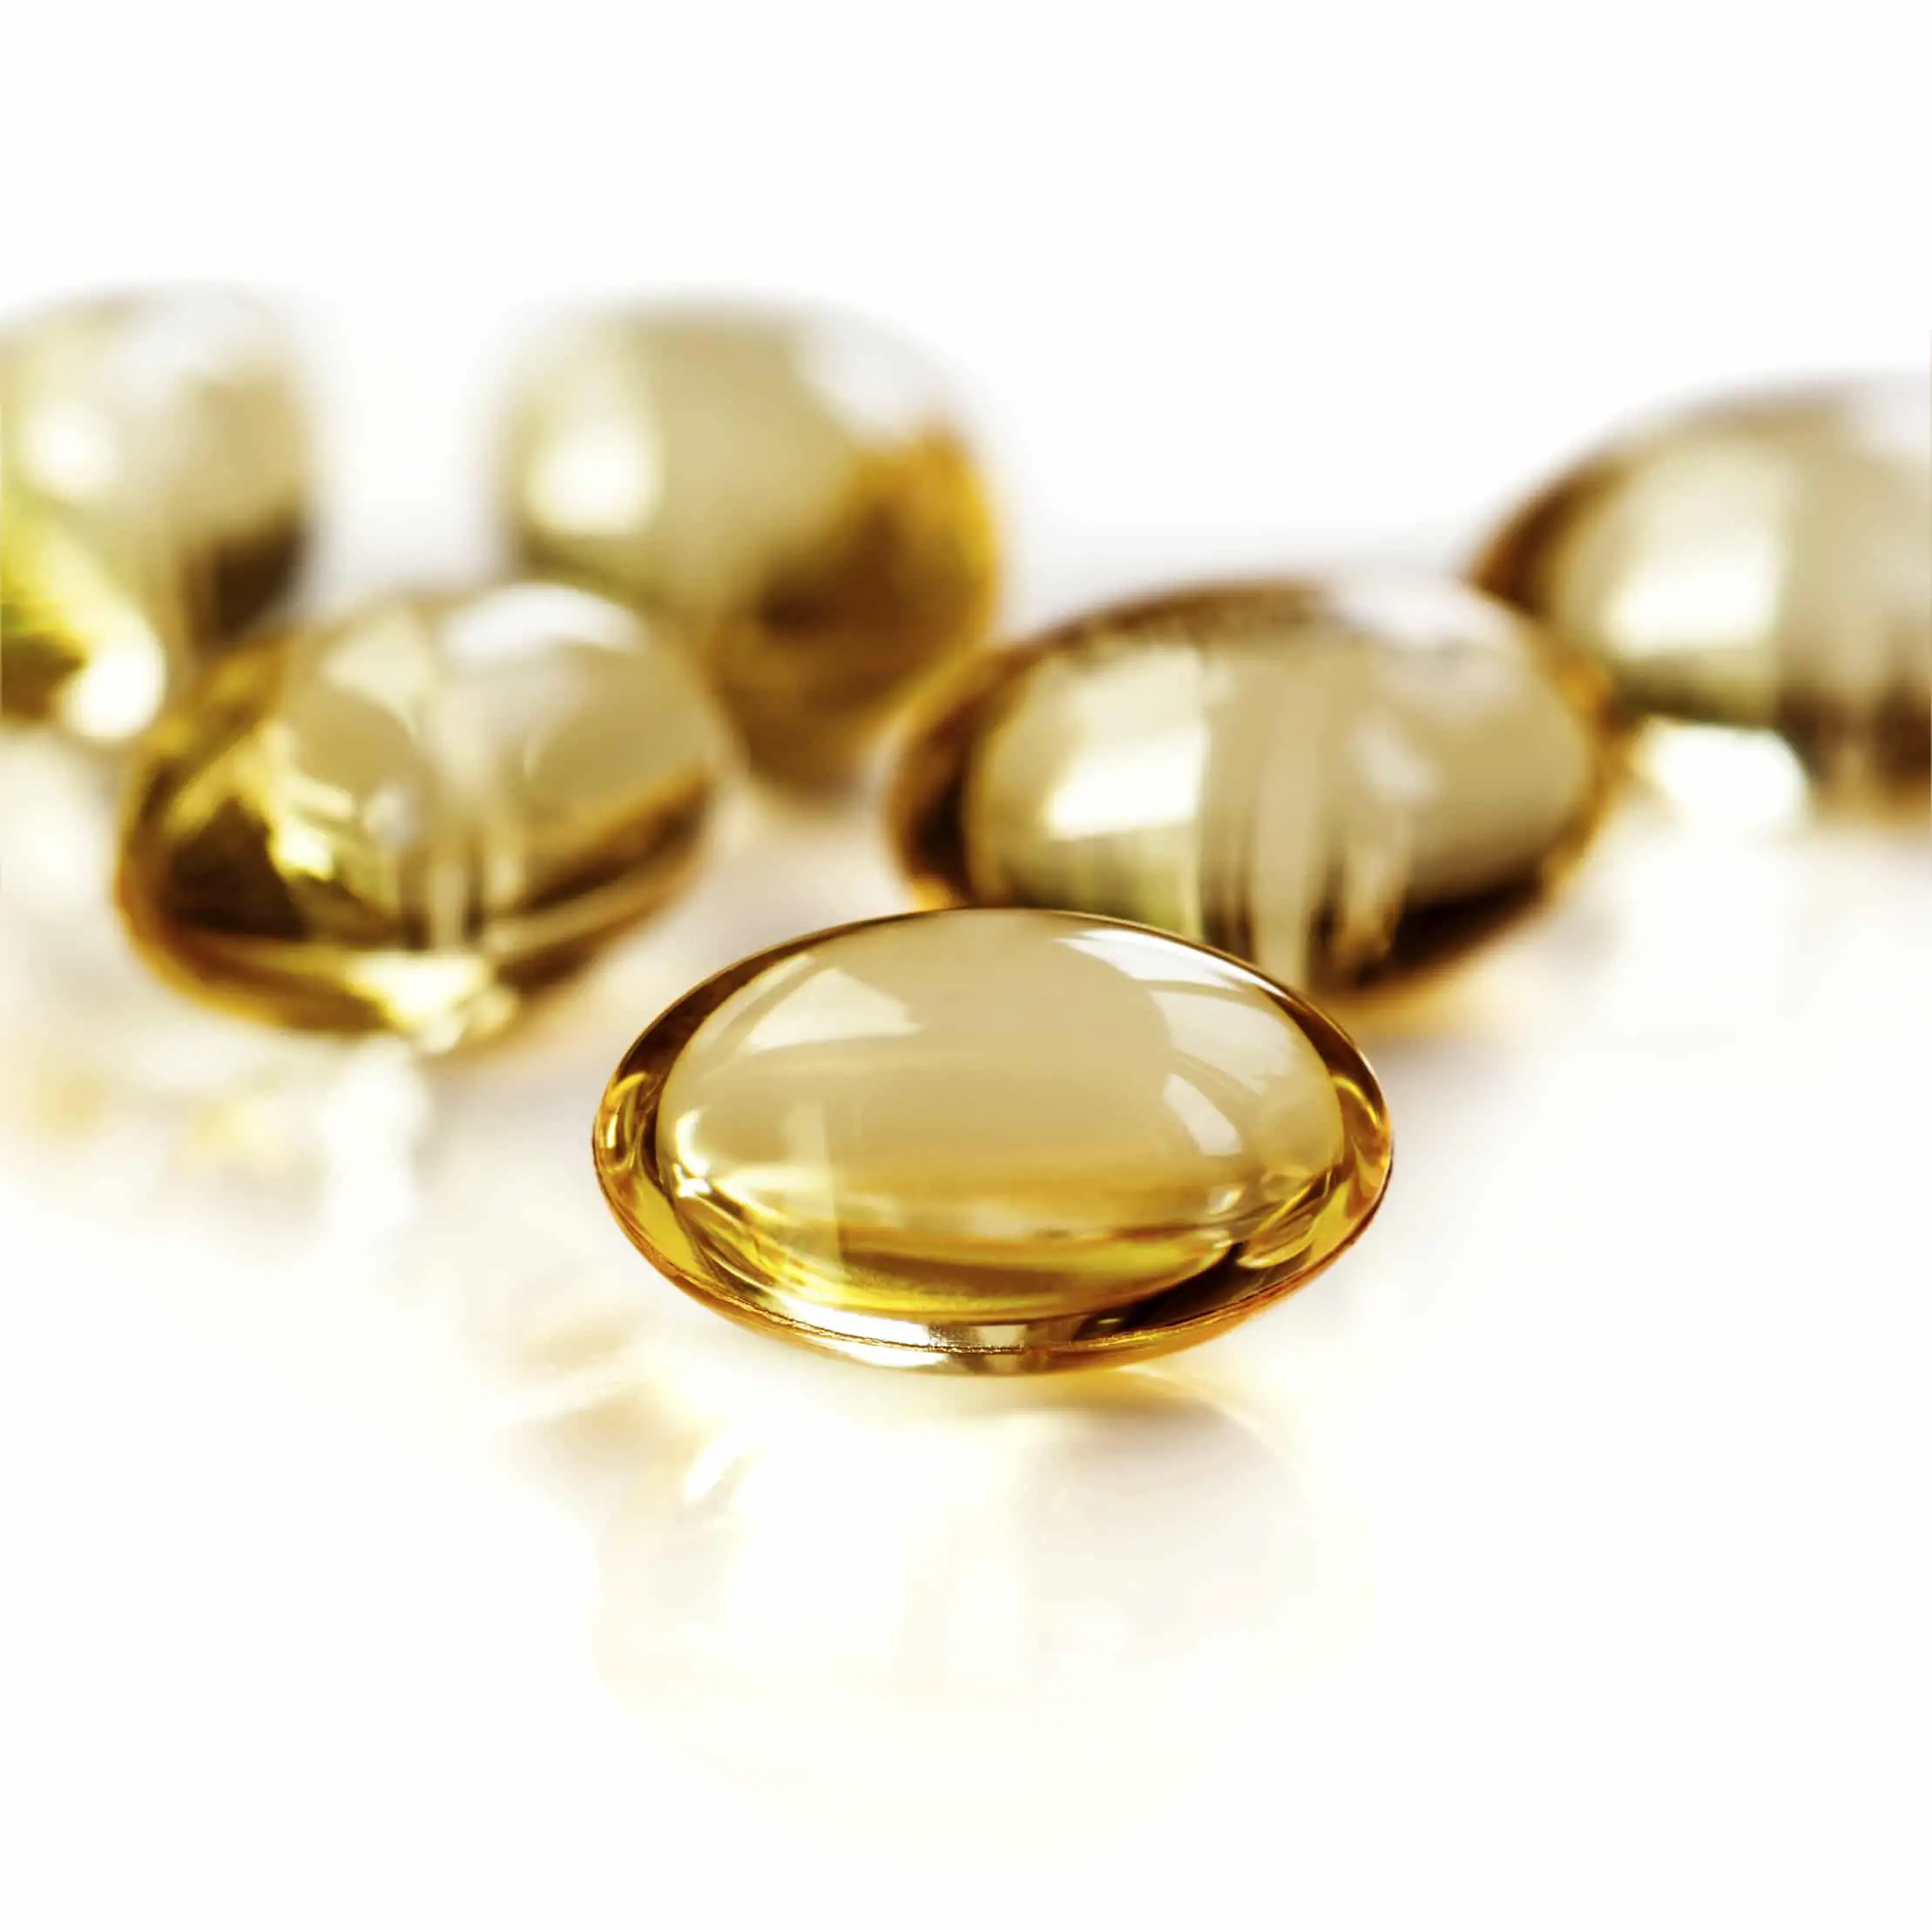 High doses of vitamin D may hurt seniors instead of help